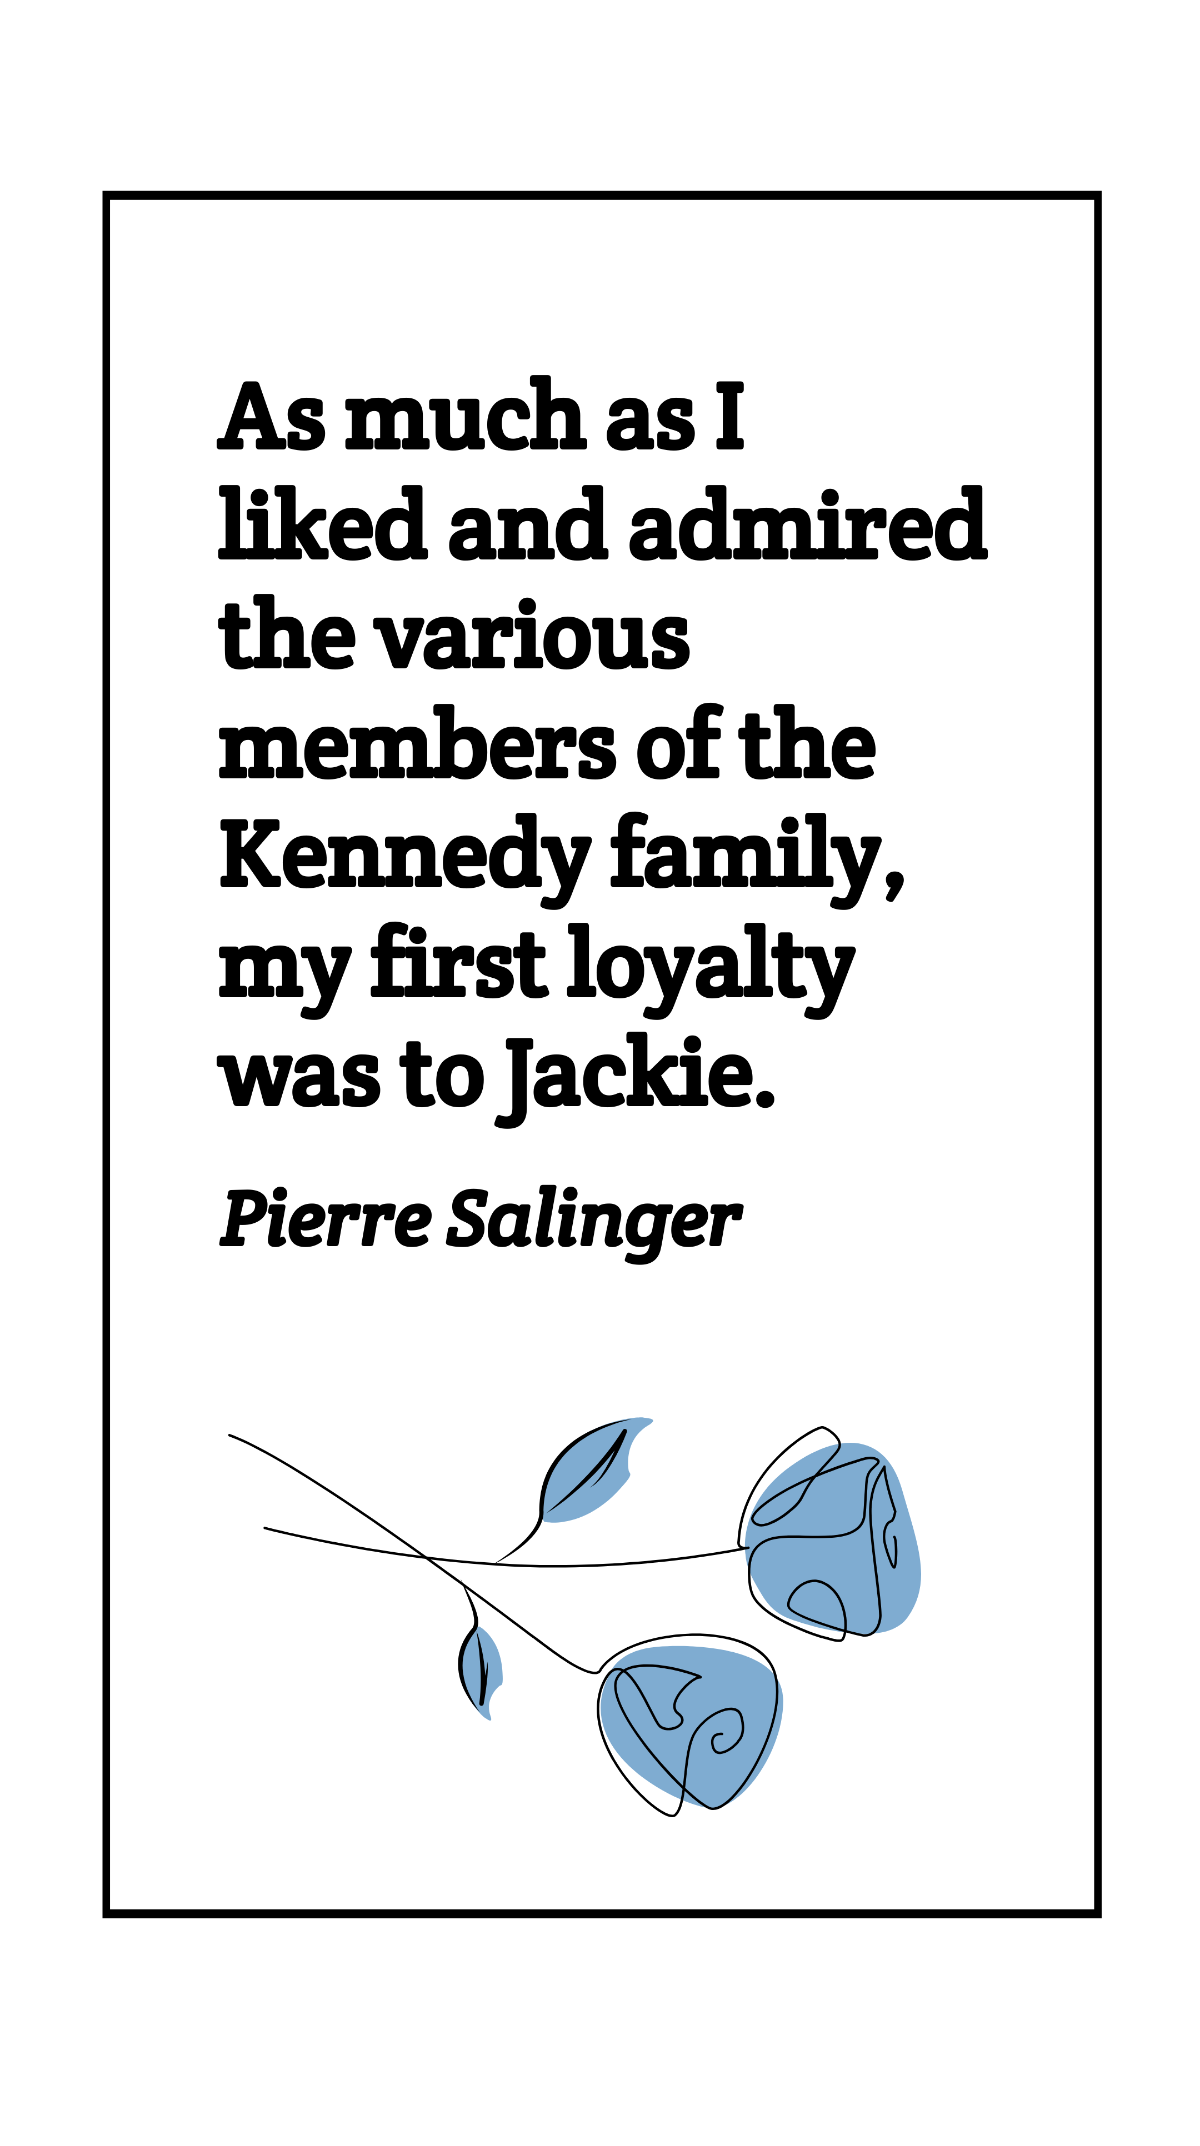 Pierre Salinger - As much as I liked and admired the various members of the Kennedy family, my first loyalty was to Jackie.